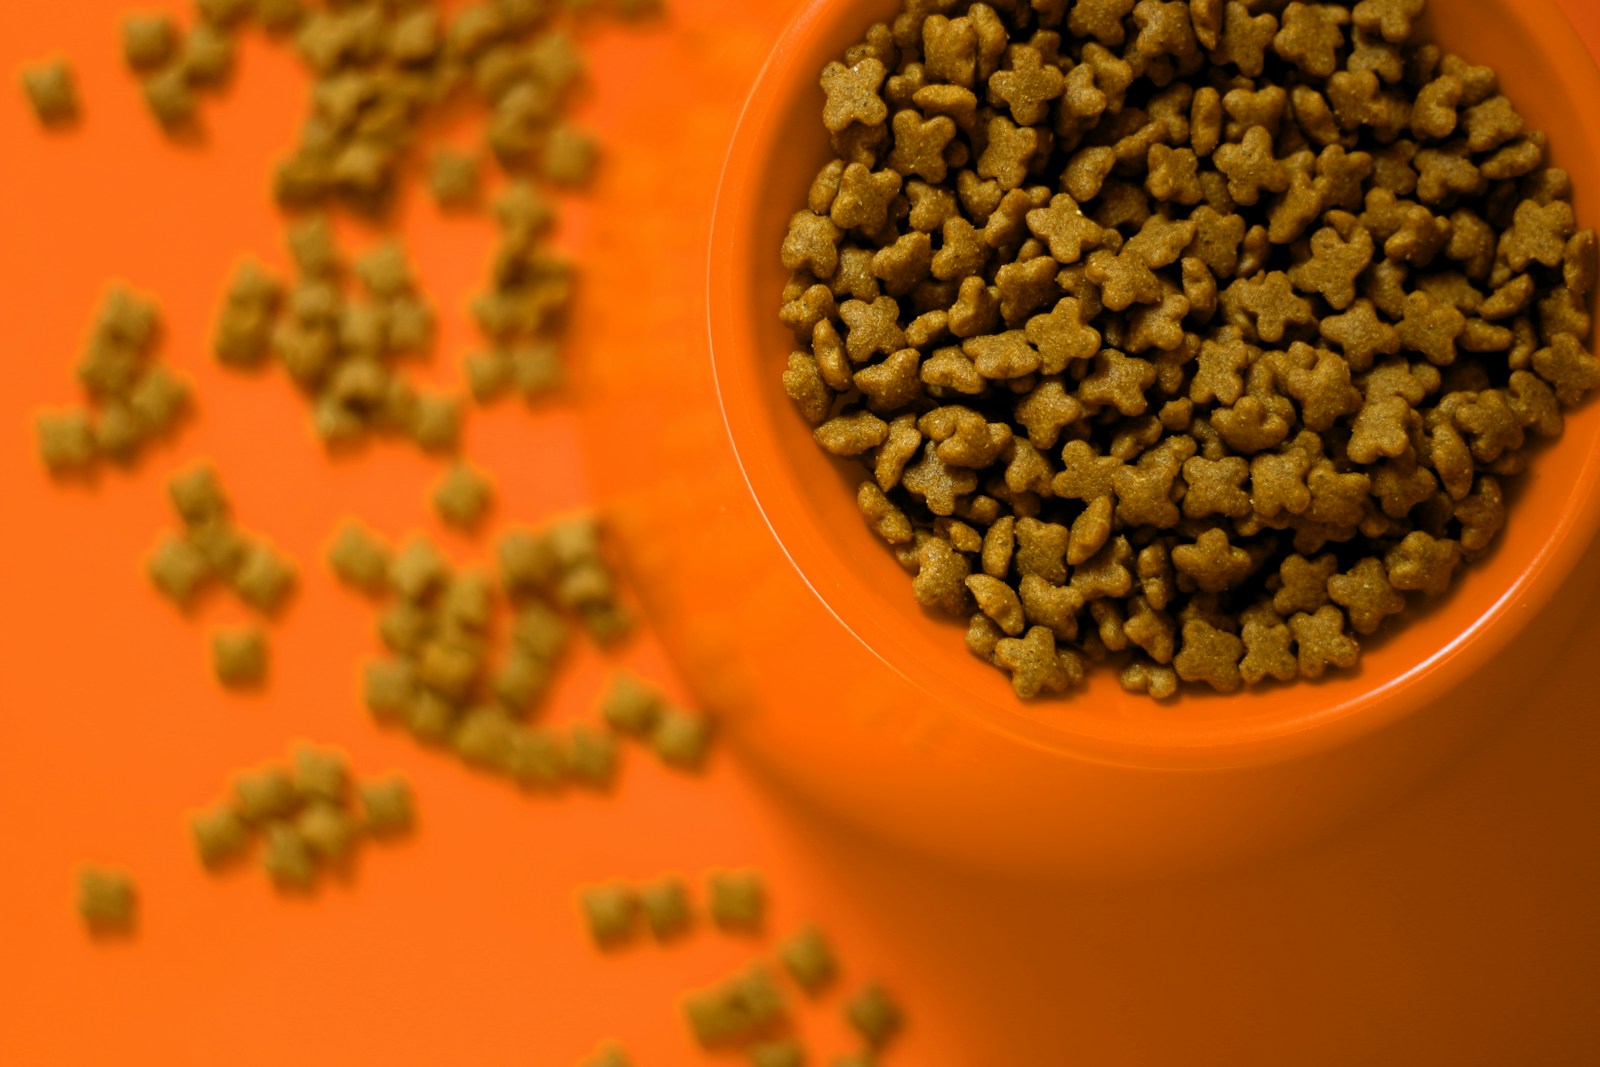 Homemade Dog Food Recipes: Healthy Meals Your Pup Will Love